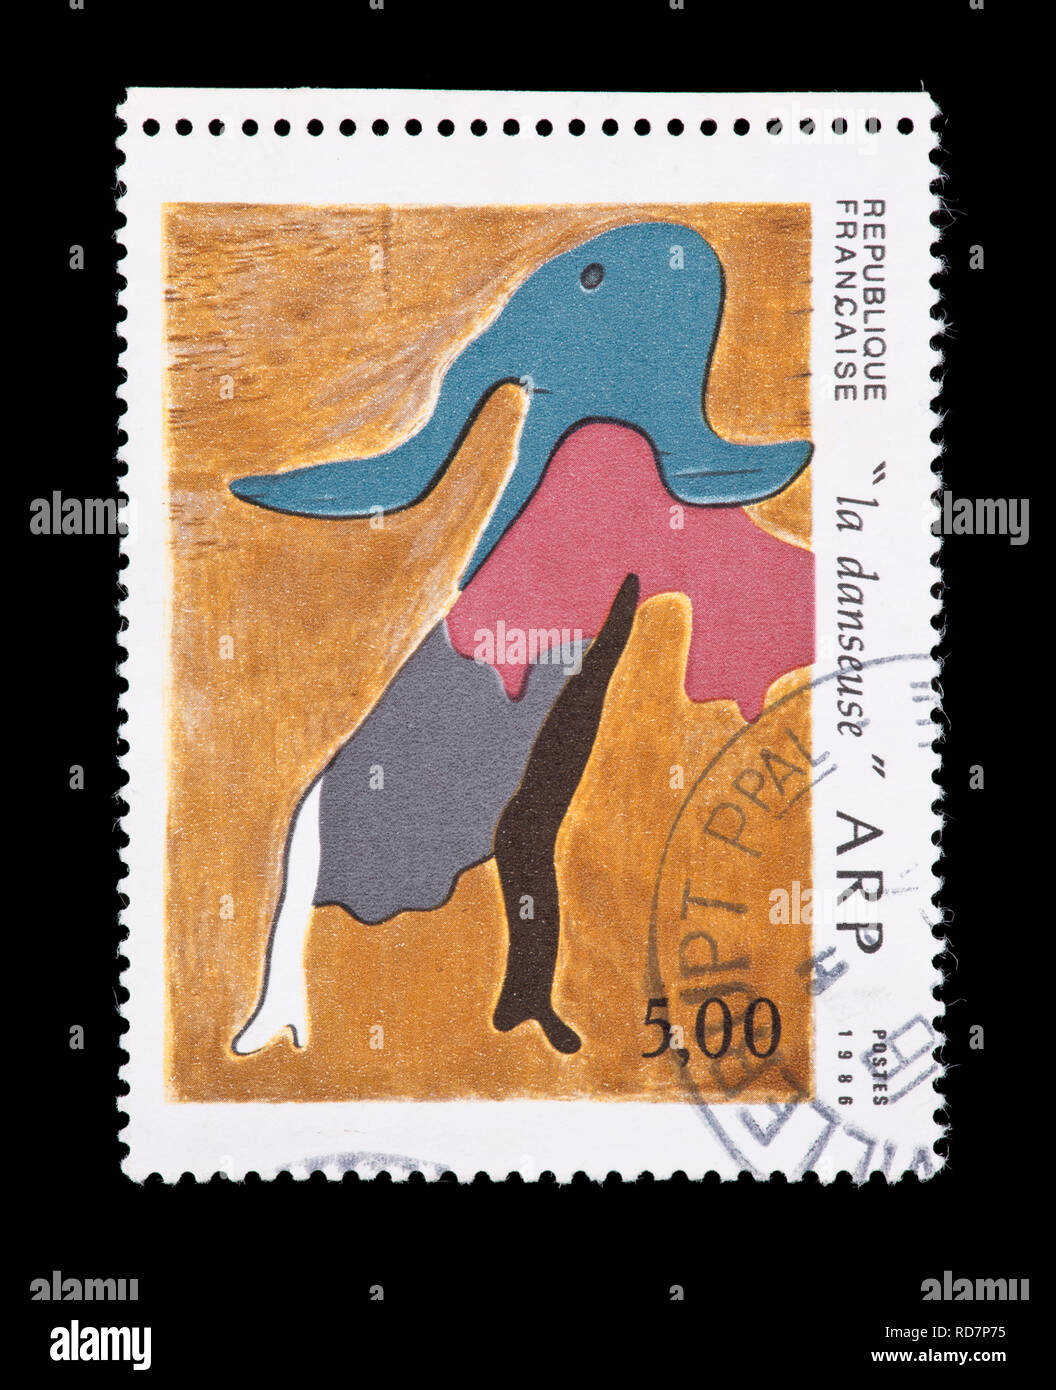 Postage stamp from France depicting the the painting 'The Dancer' by Jean Arp. Stock Photo